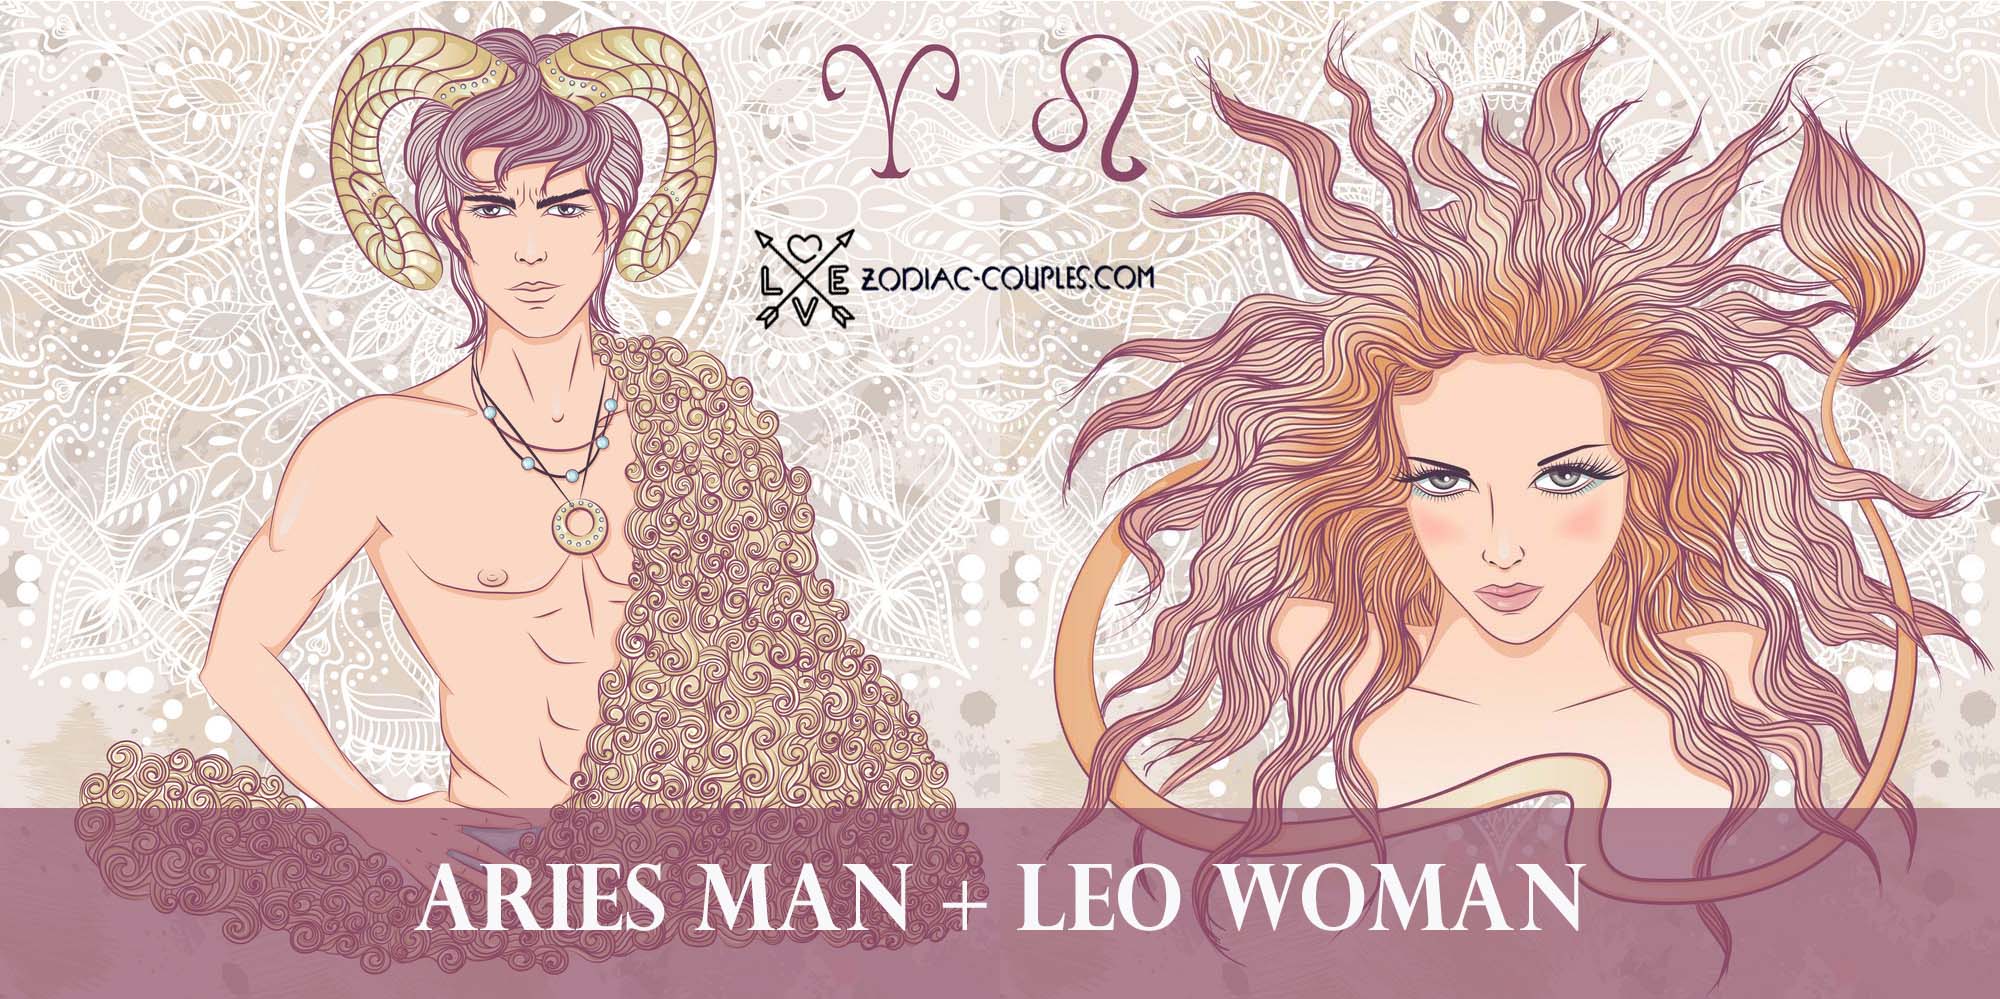 Aries man + Leo woman famous couples and compatibility ♈ ♌ - Zodiac Couples...